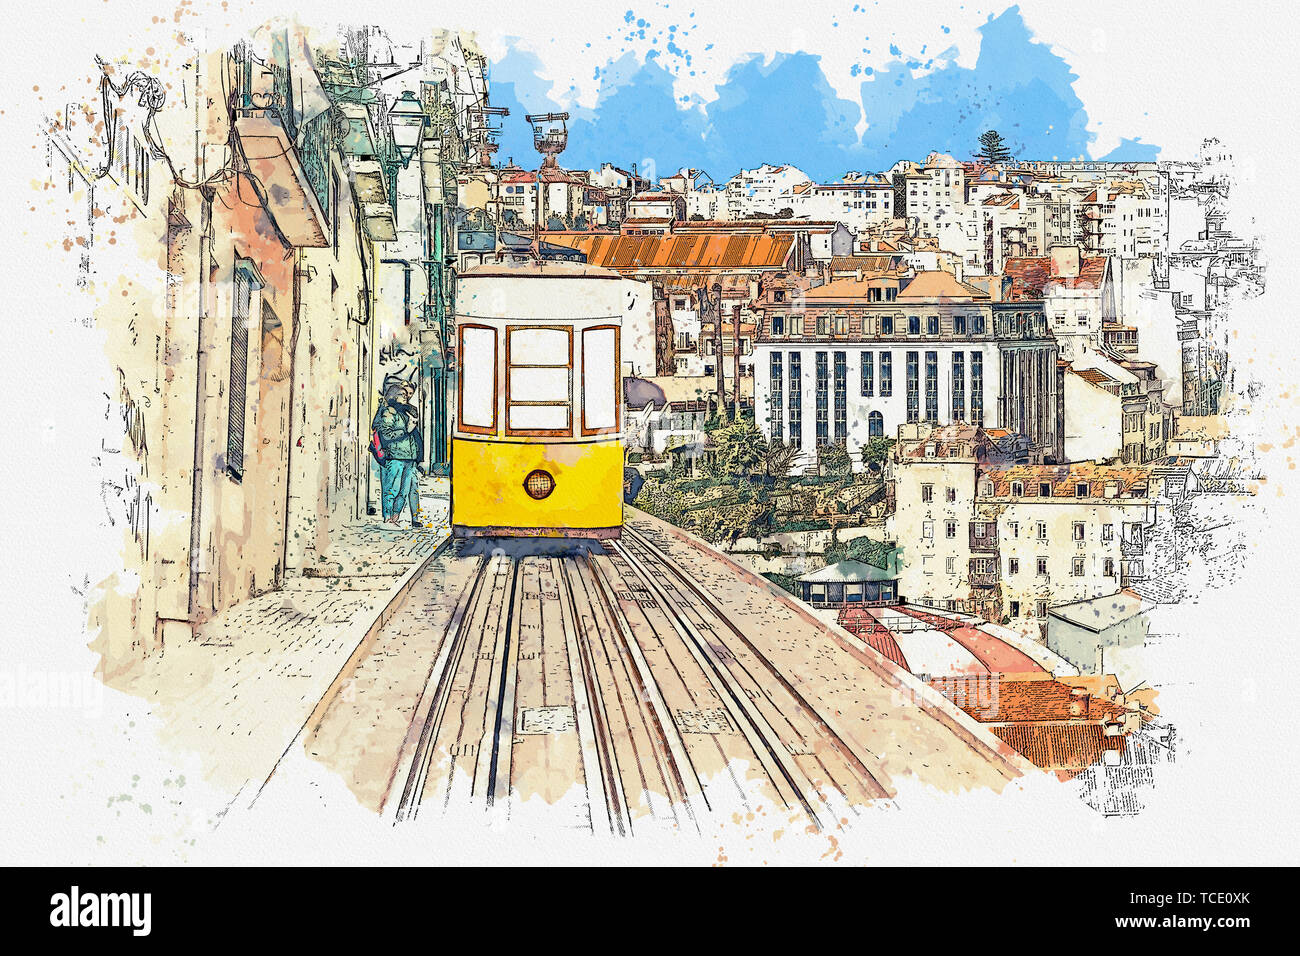 Watercolor sketch or illustration of a traditional yellow tram on a street in Lisbon in Portugal. Stock Photo